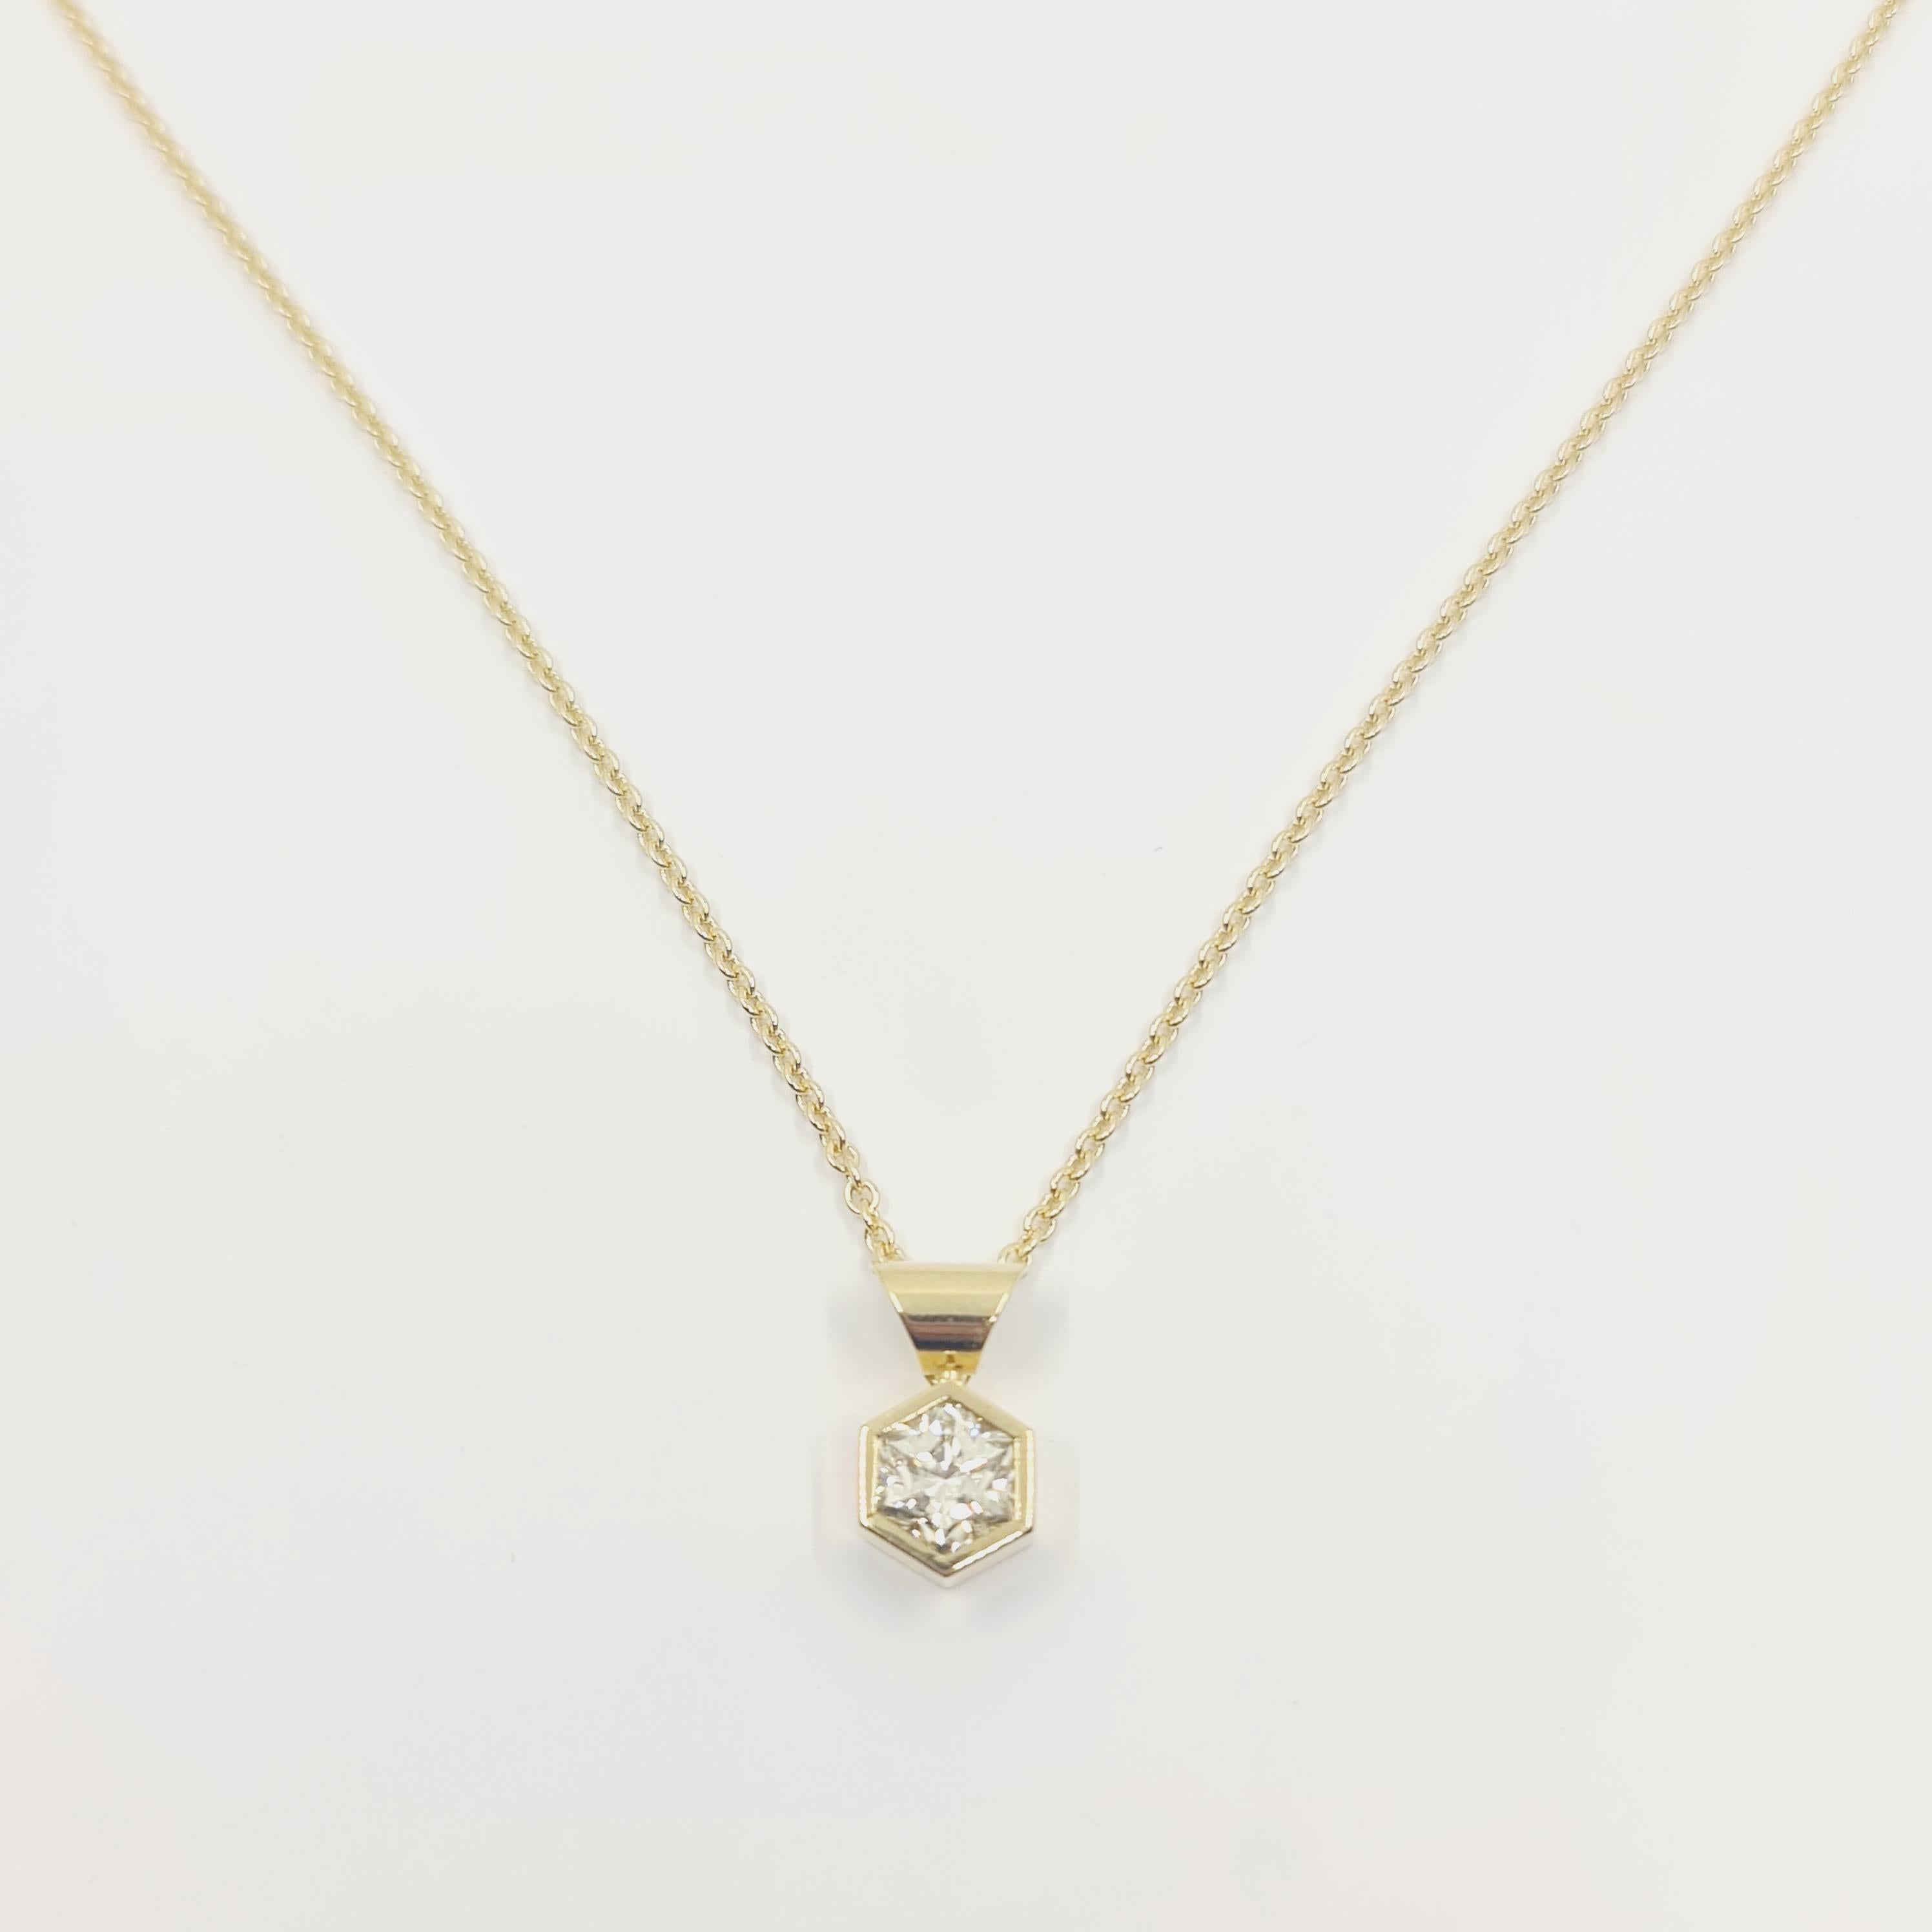 HRD Certified 2.00 Ct. Diamond Necklace 750 Gold with Rare Hexagon Cut Diamond For Sale 3